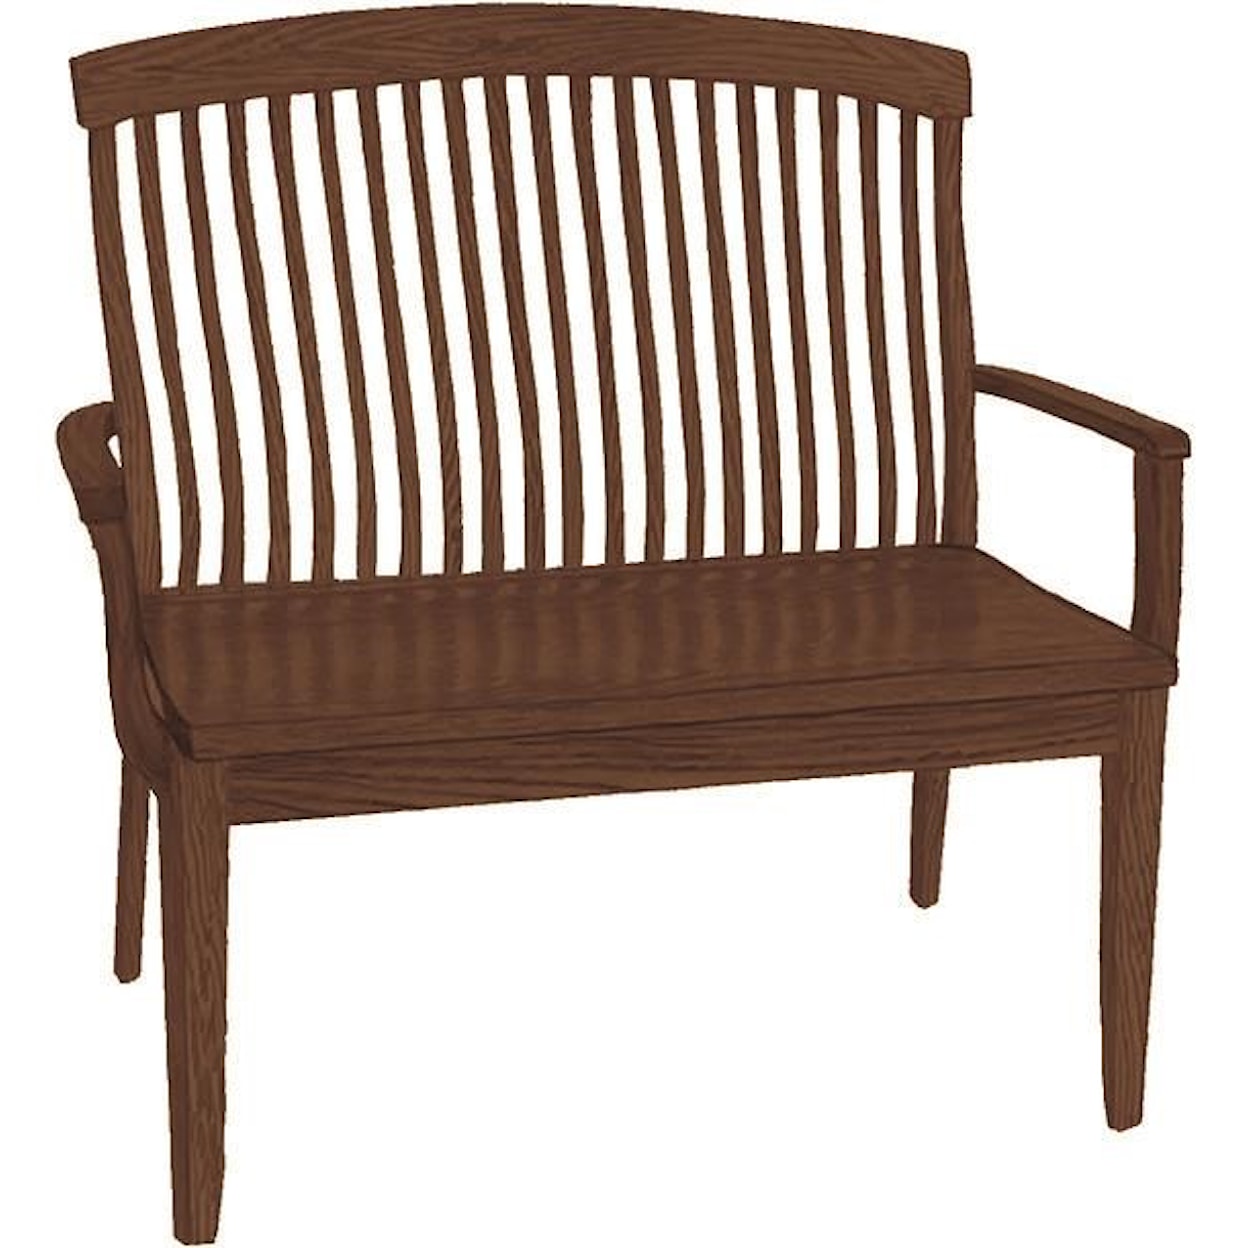 Oakland Wood Empire 36" Wide Bench